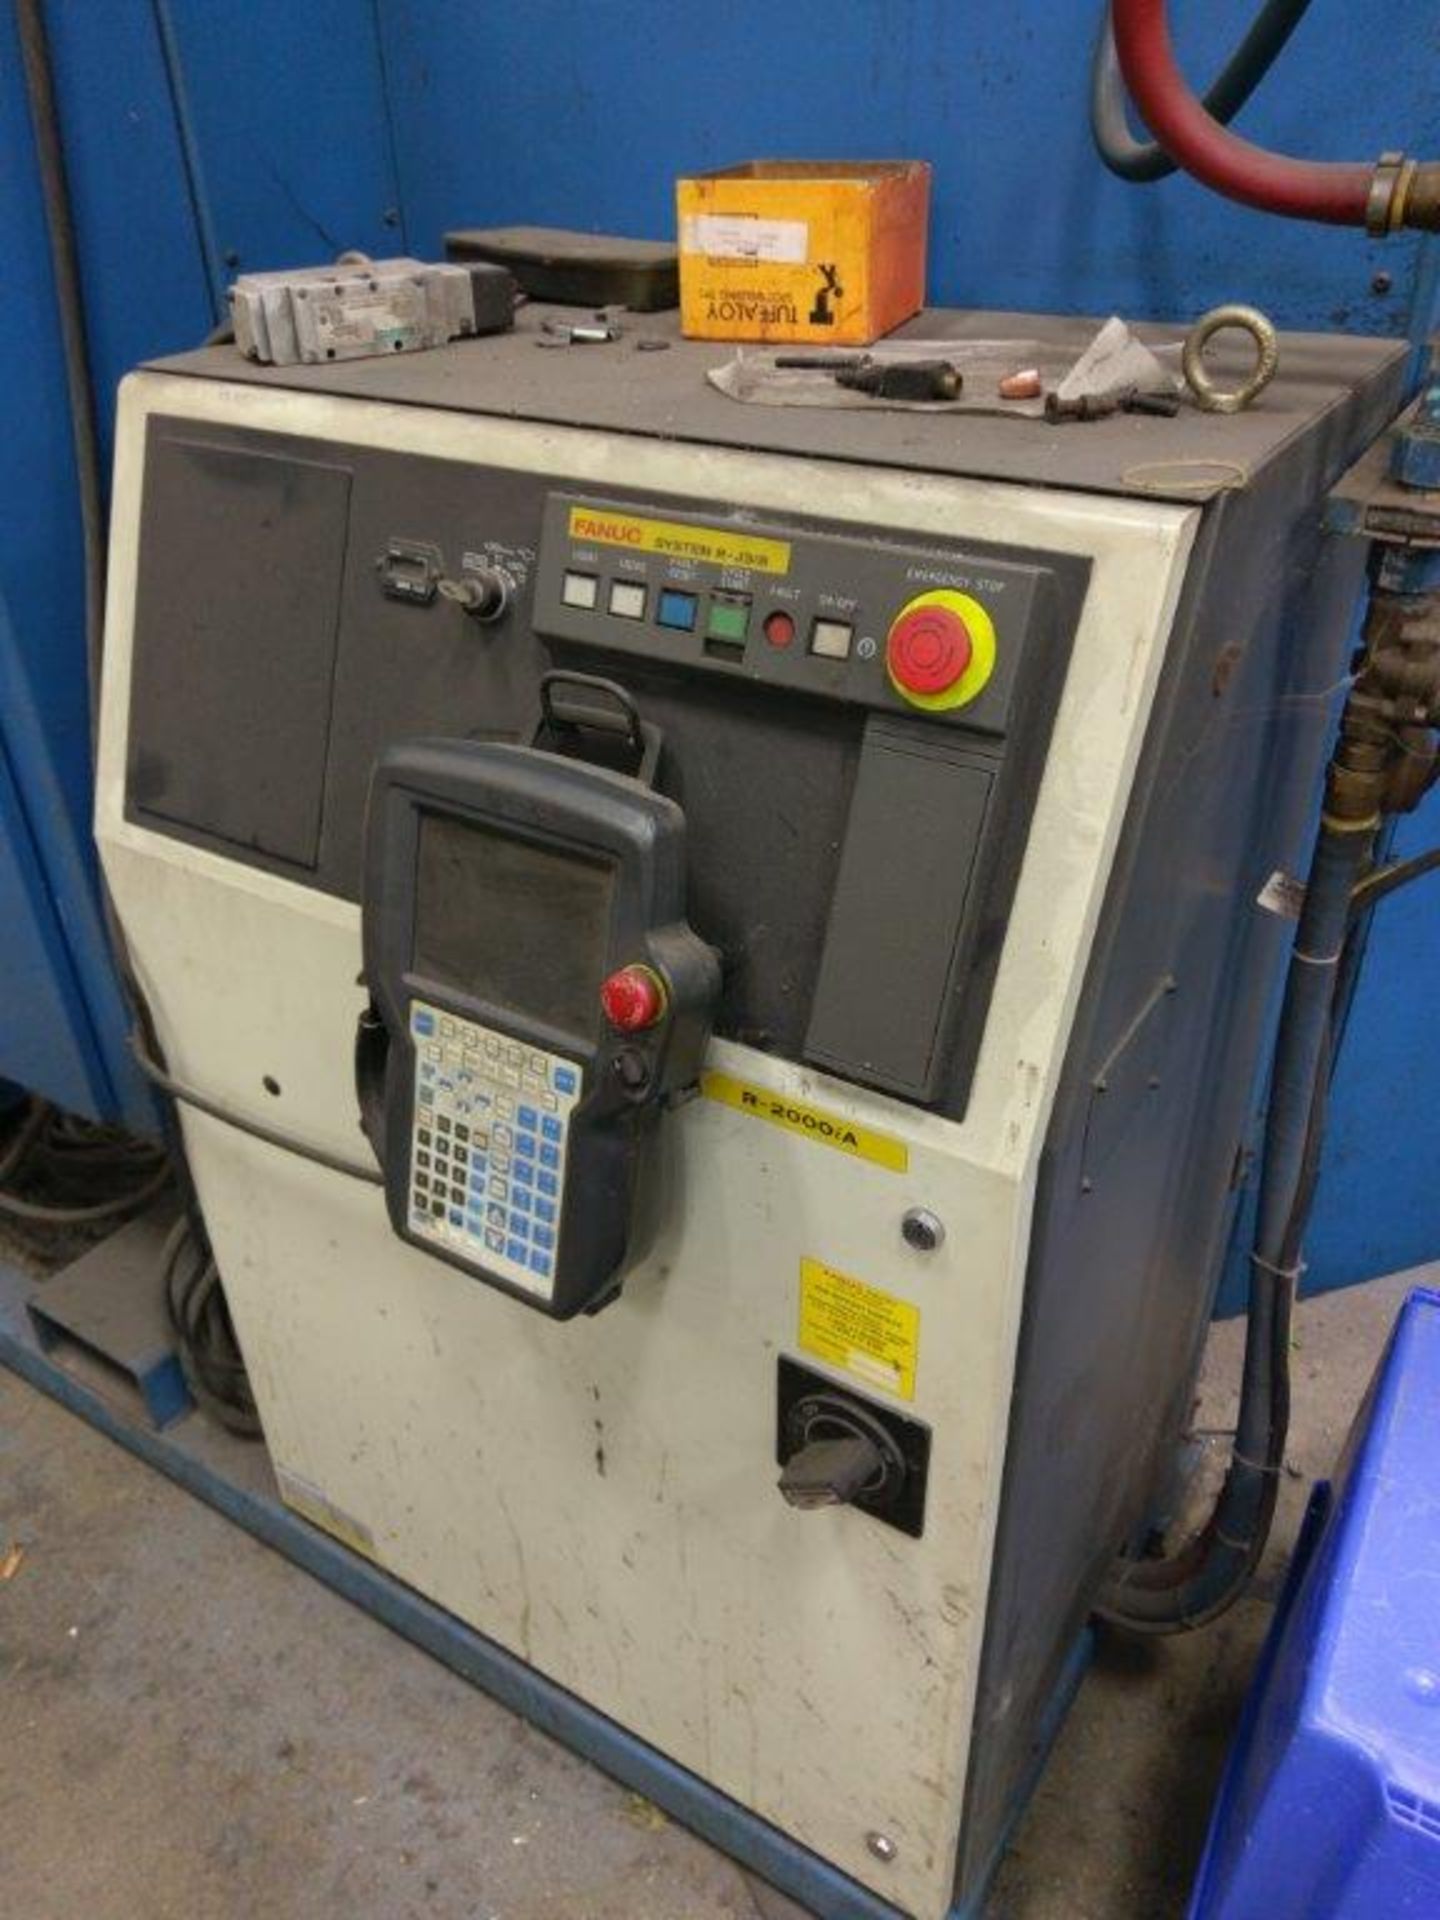 Fanuc Robot Cell with R-2000iA Arm, RJ3iB Controller, Technitron Weld Controller T3400 - Weld - Image 4 of 8